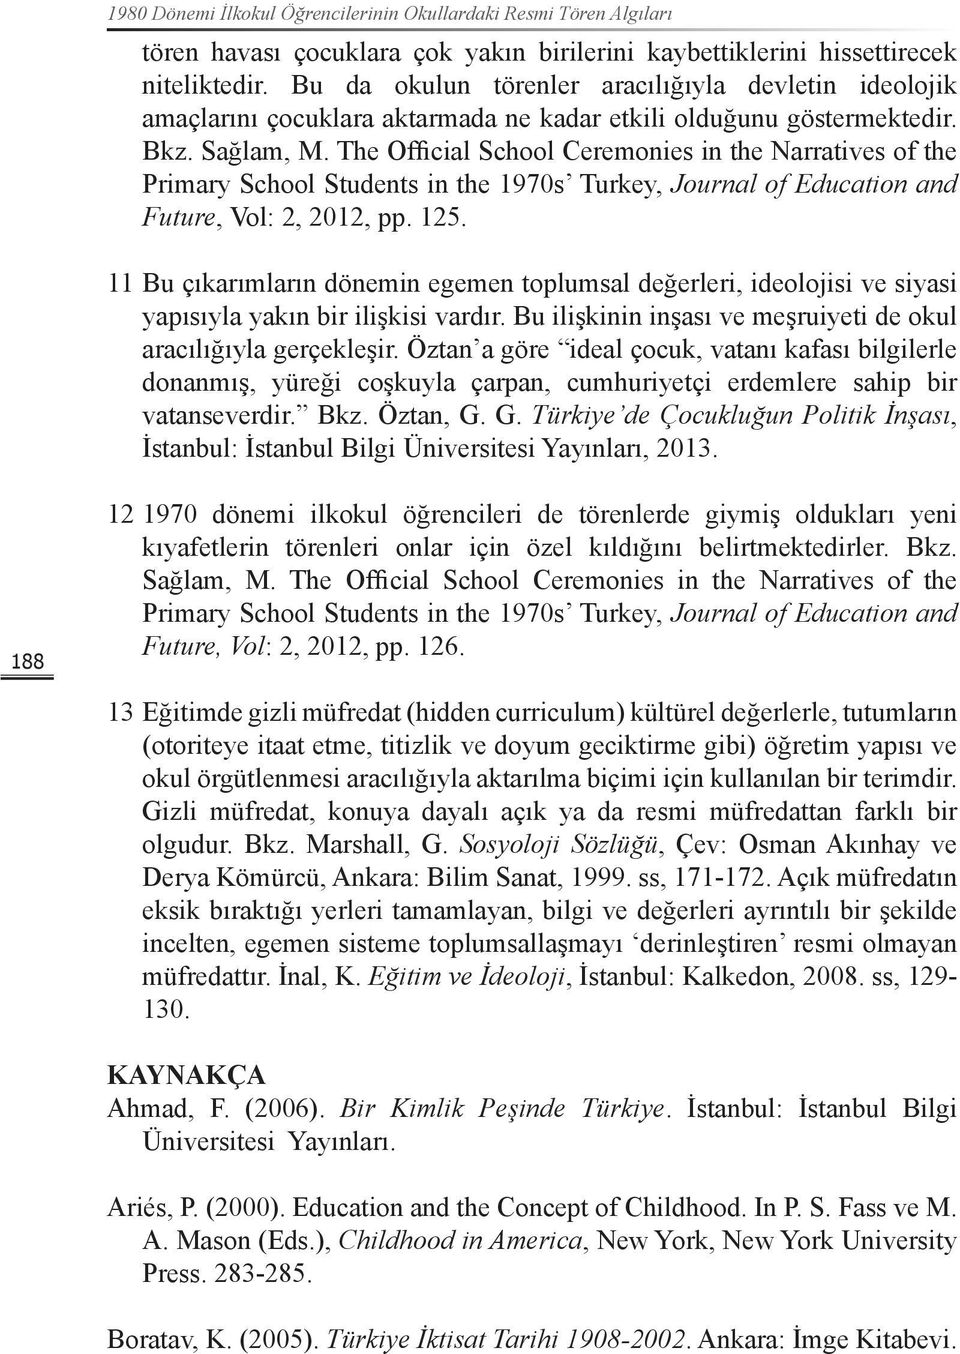 The Official School Ceremonies in the Narratives of the Primary School Students in the 1970s Turkey, Journal of Education and Future, Vol: 2, 2012, pp. 125.